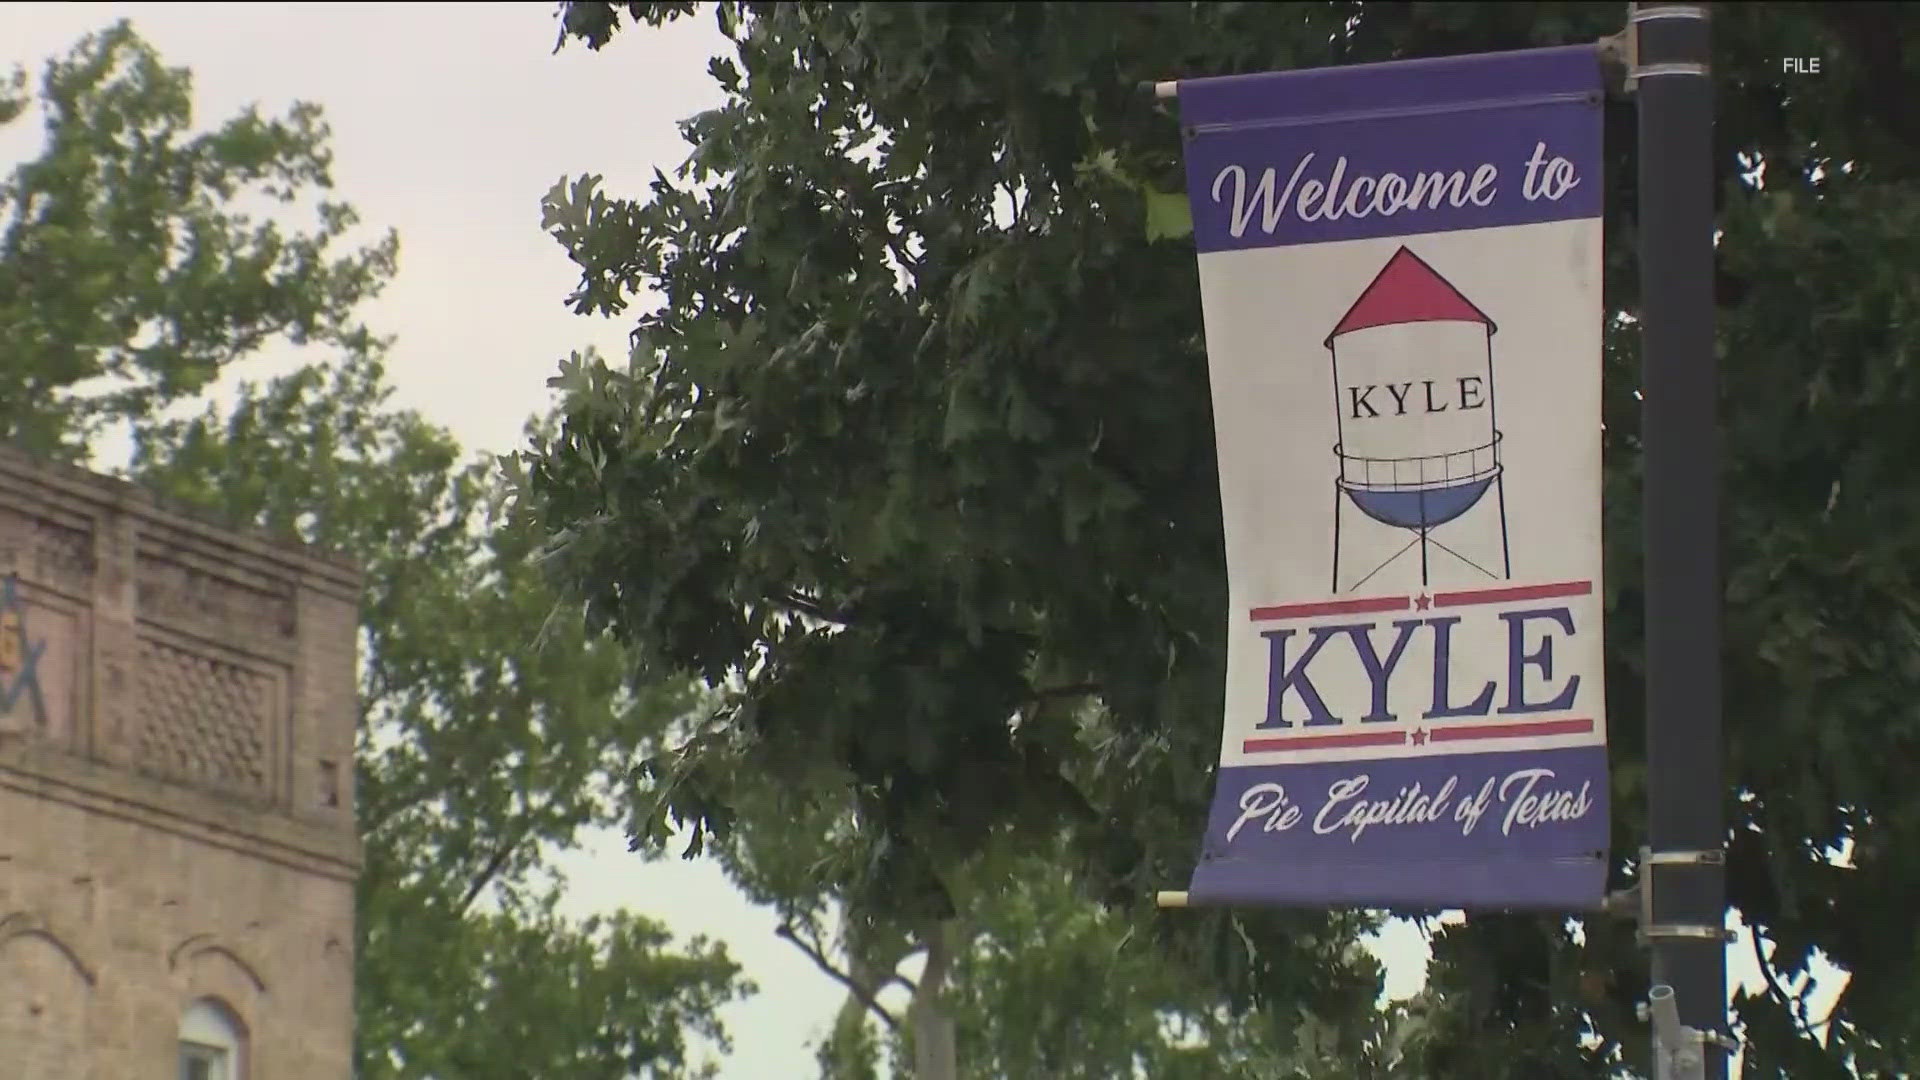 The city of Kyle may not have enough water to meet its need in the future.